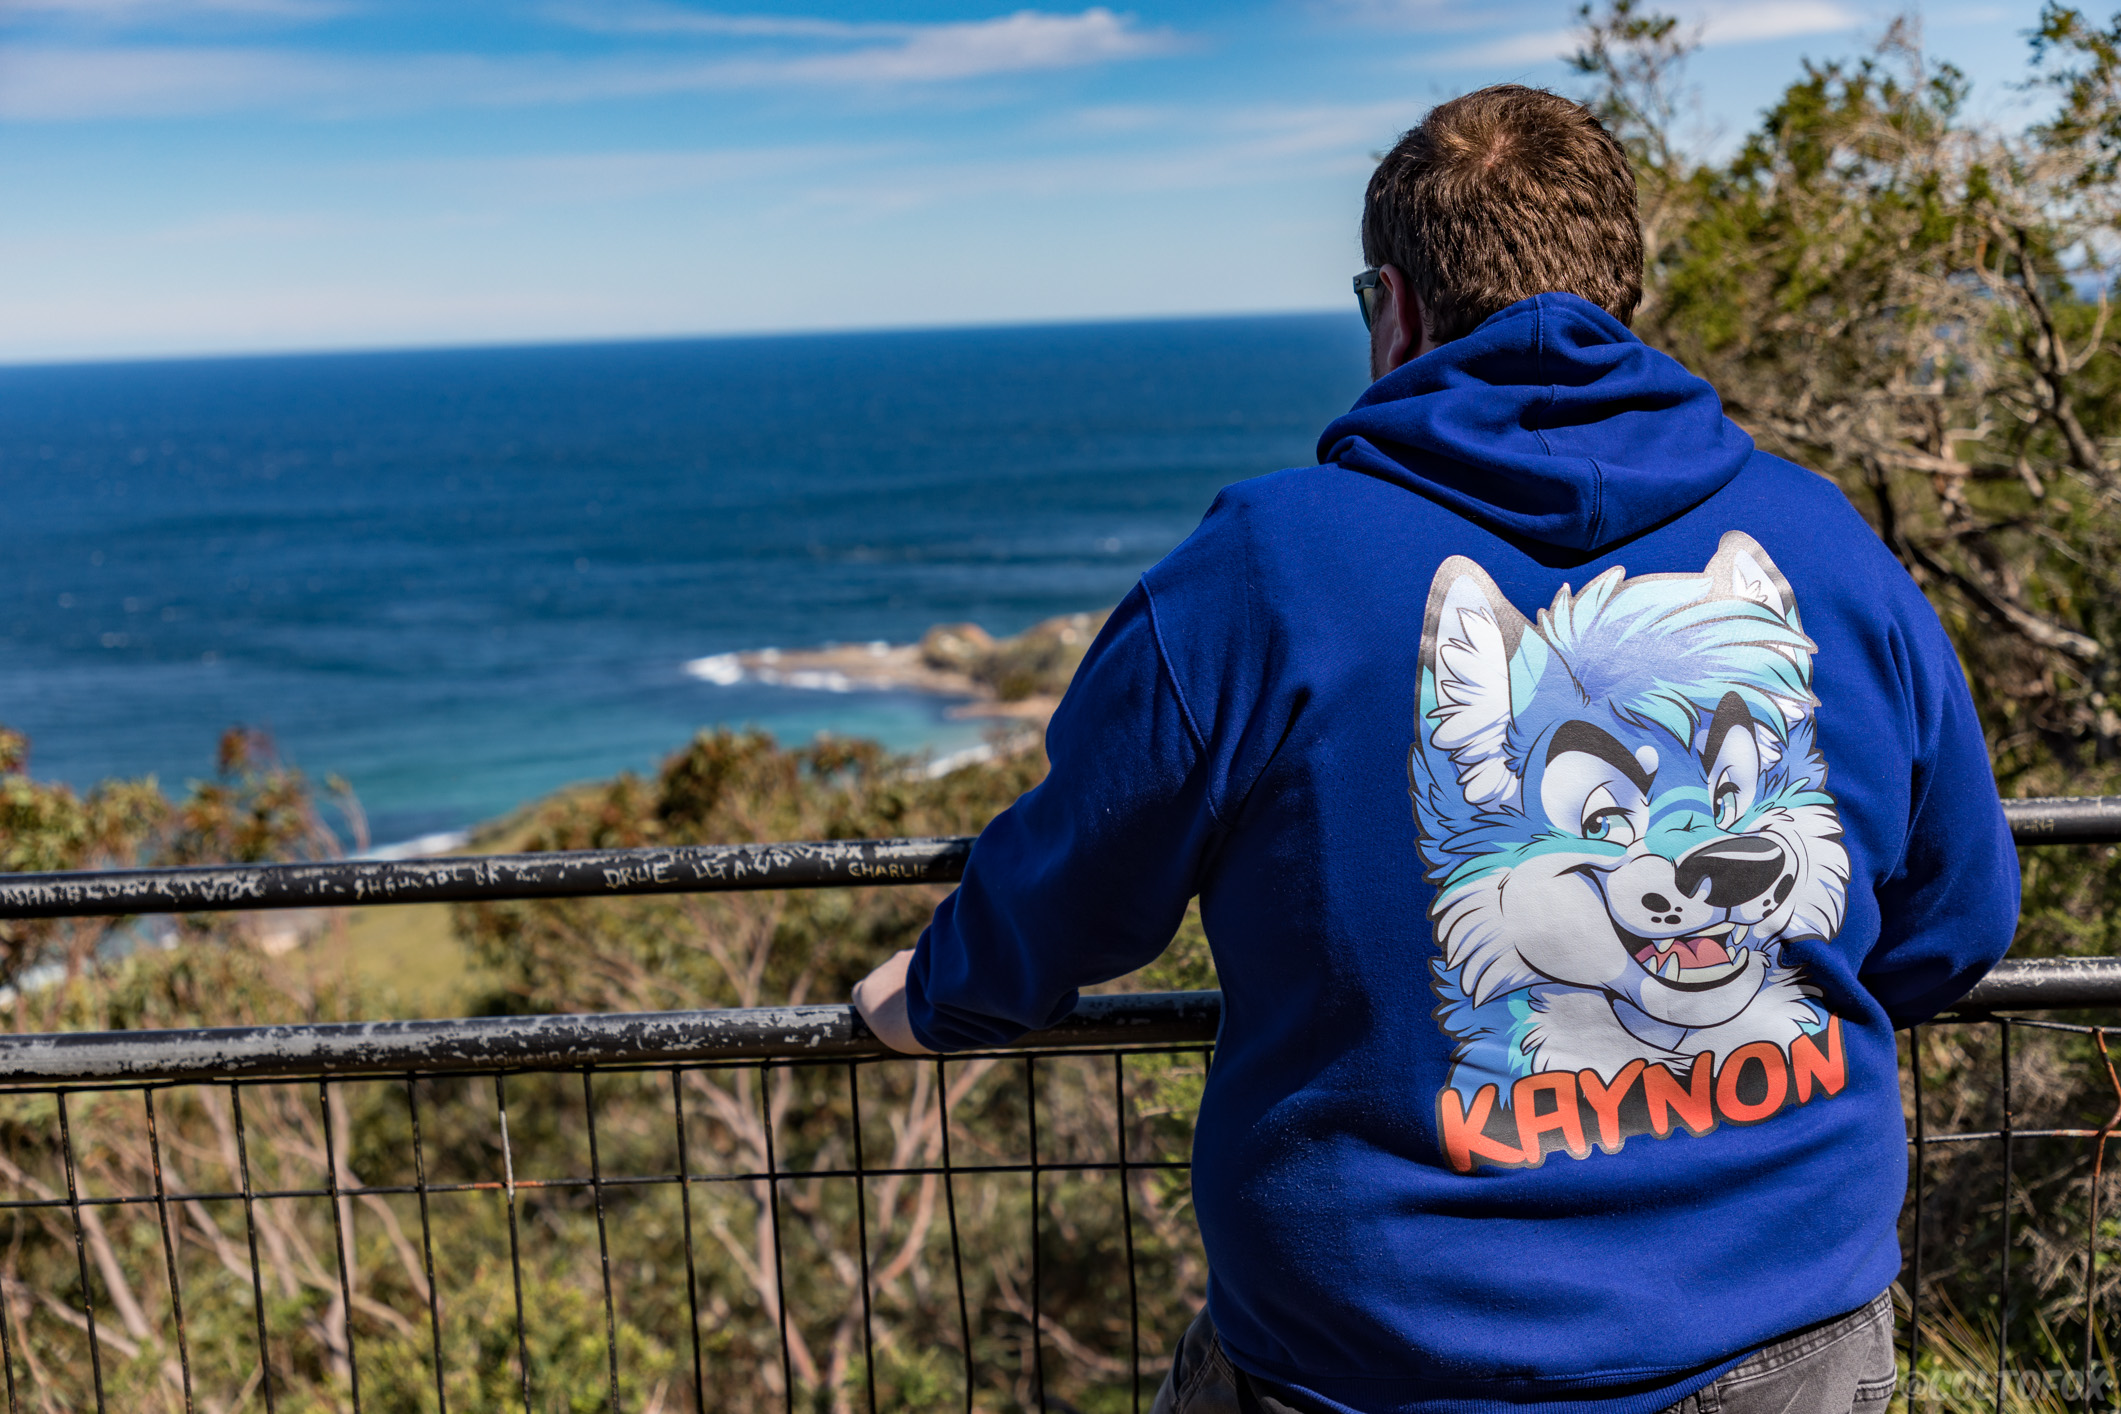 Kaynon at Governor Game Lookout